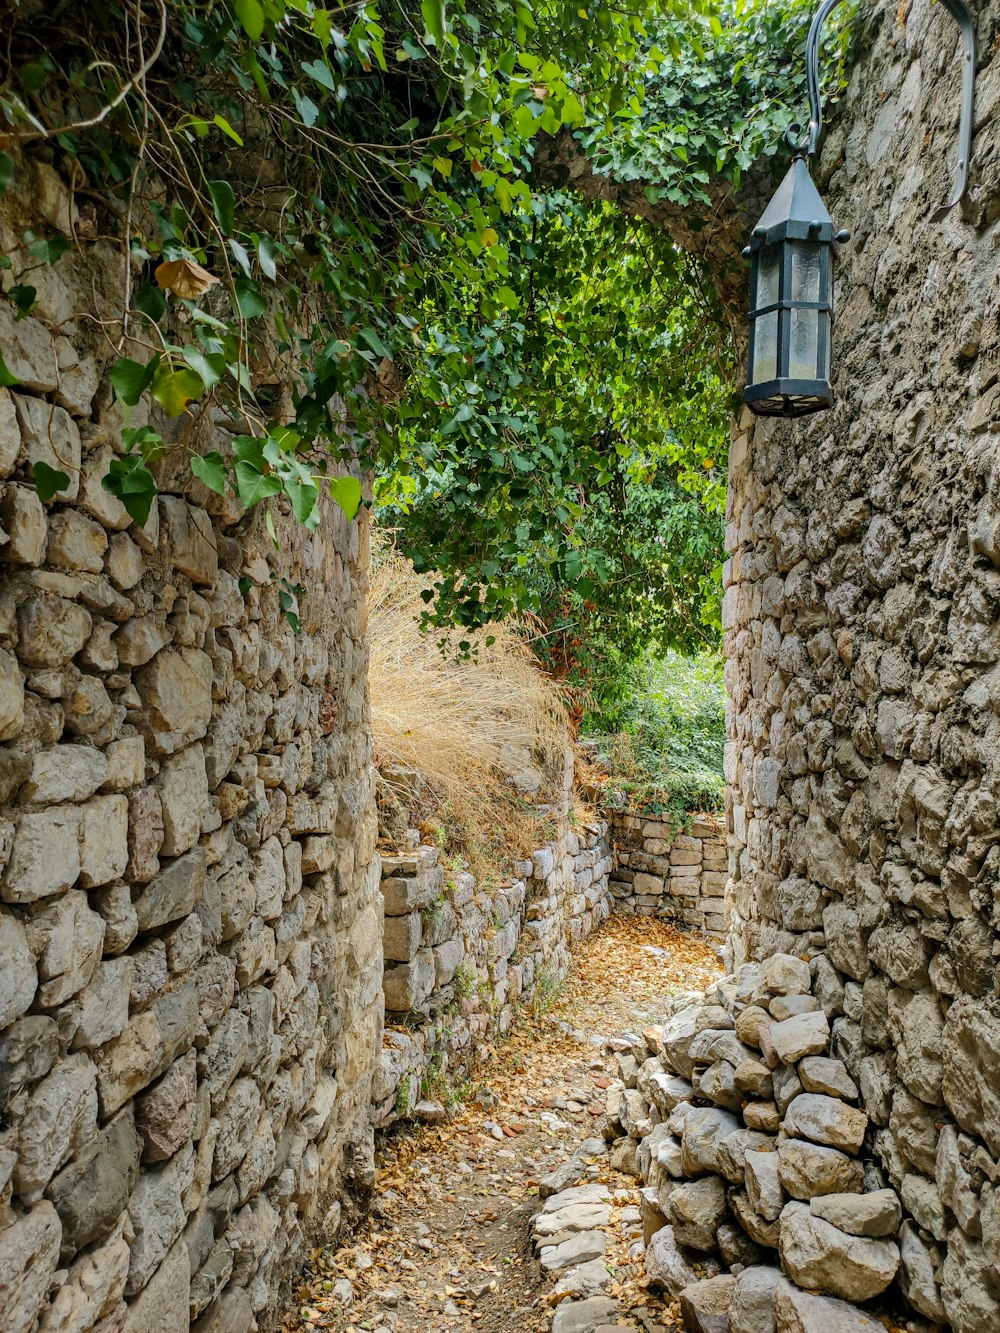 a stone wall with a lantern hanging from it